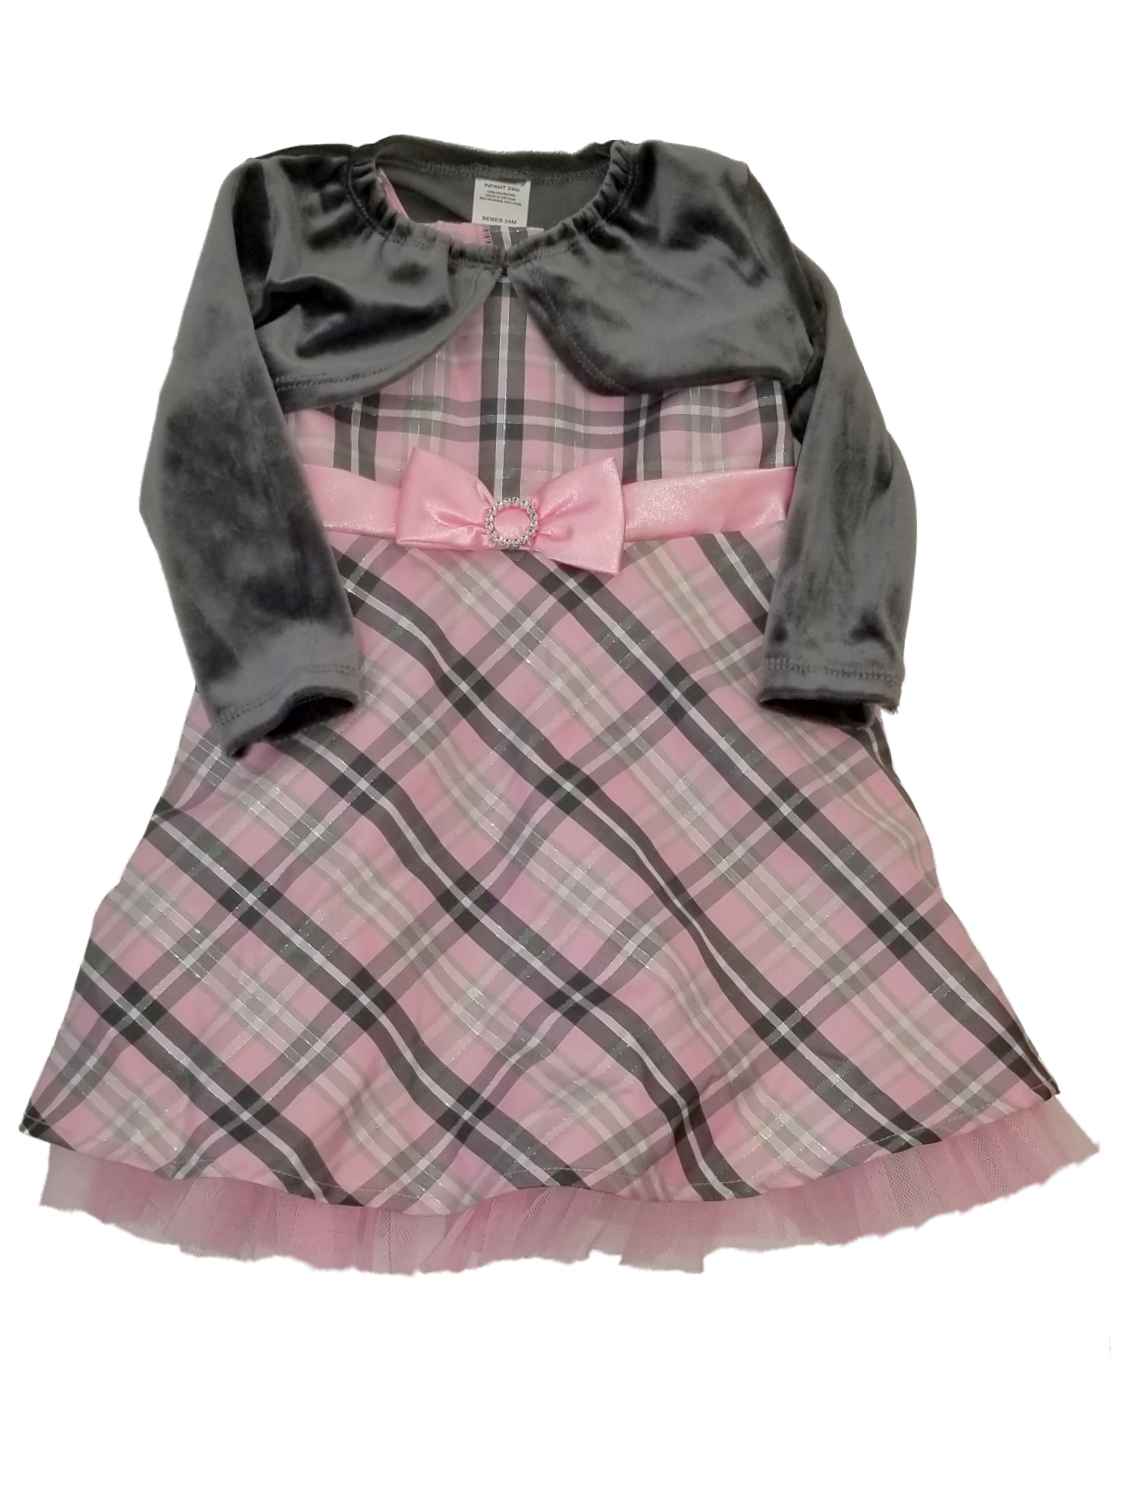 Youngland Infant Toddler Girls Pink Grey Plaid Christmas Holiday Party Dress 24M